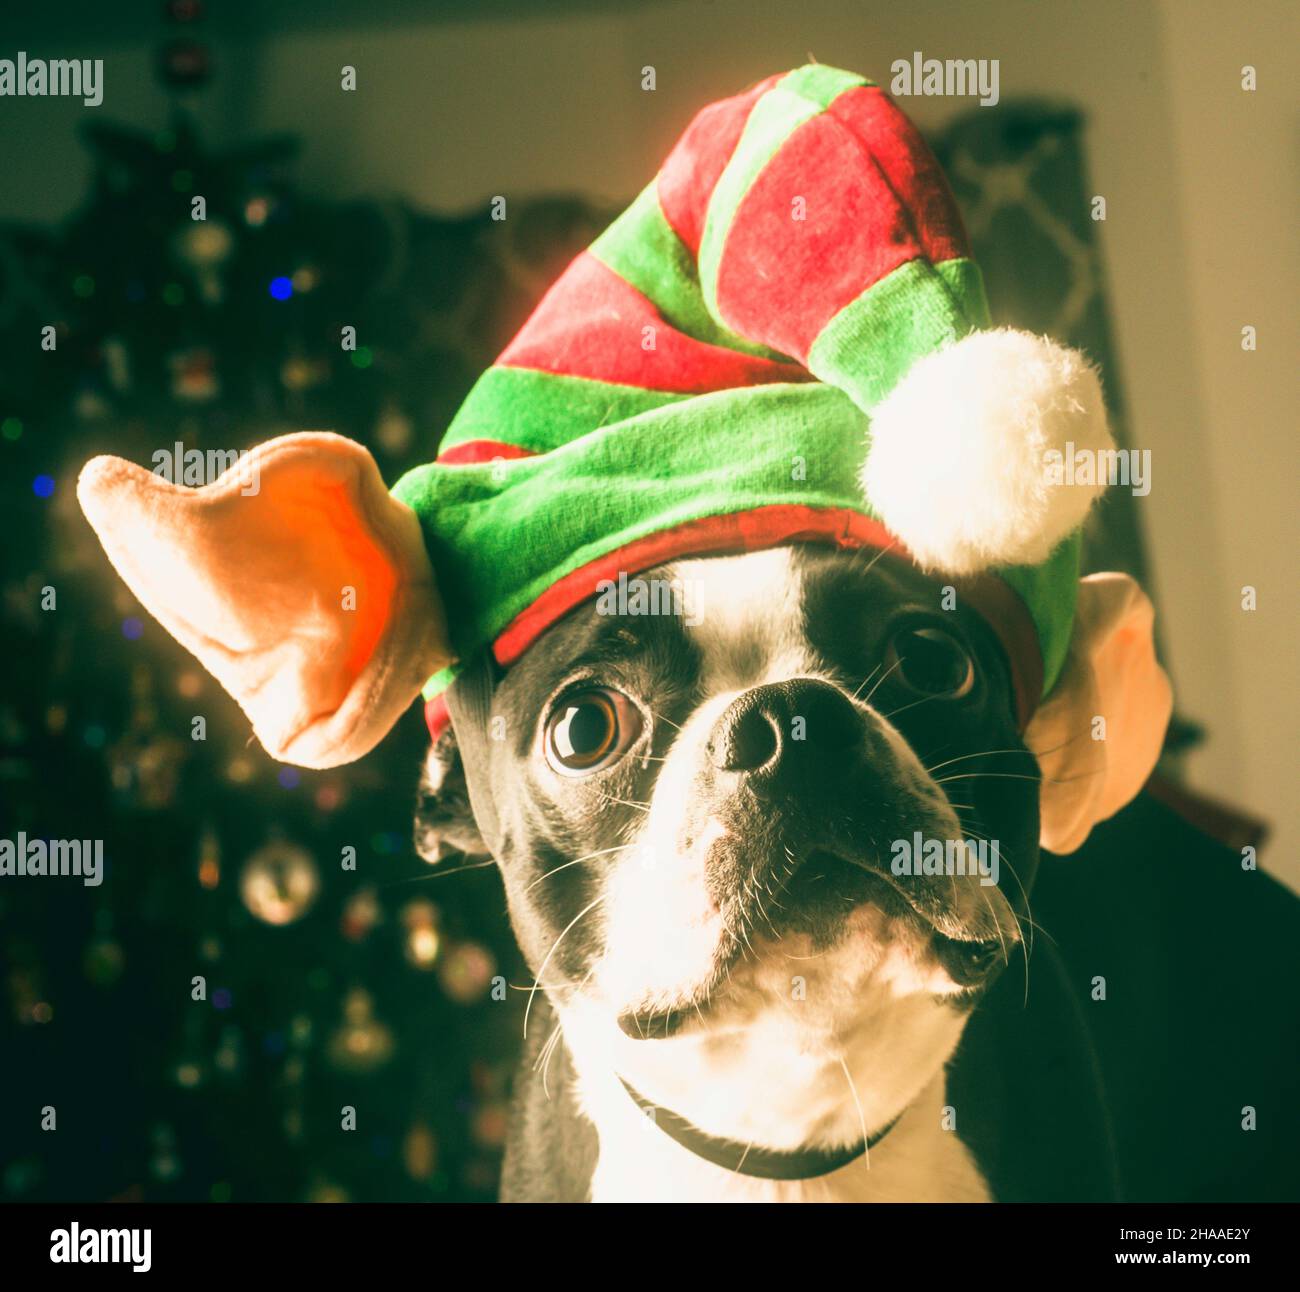 Boston Terrier Dressed up as Elf for Christmas Stock Photo